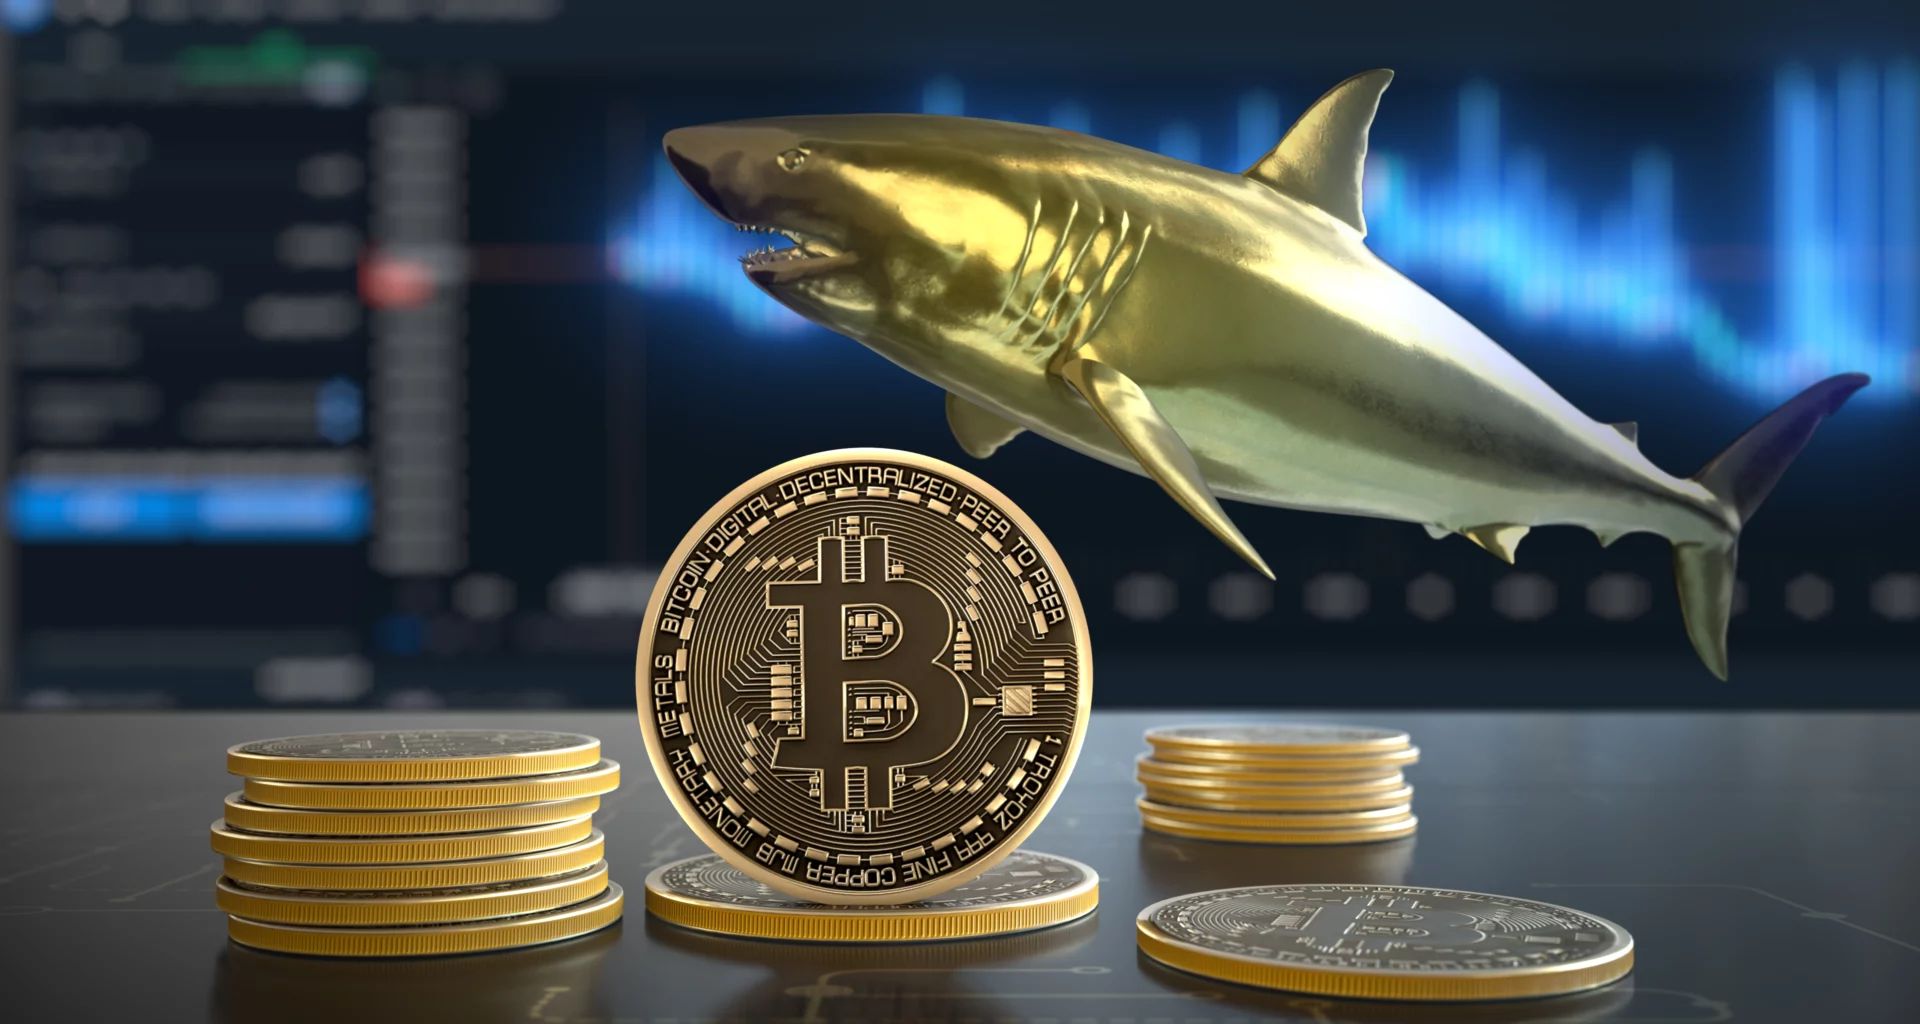 a pile of gold bitcoins in the foreground with one facing you, and a gold shark in the background along with an image of a financial chart